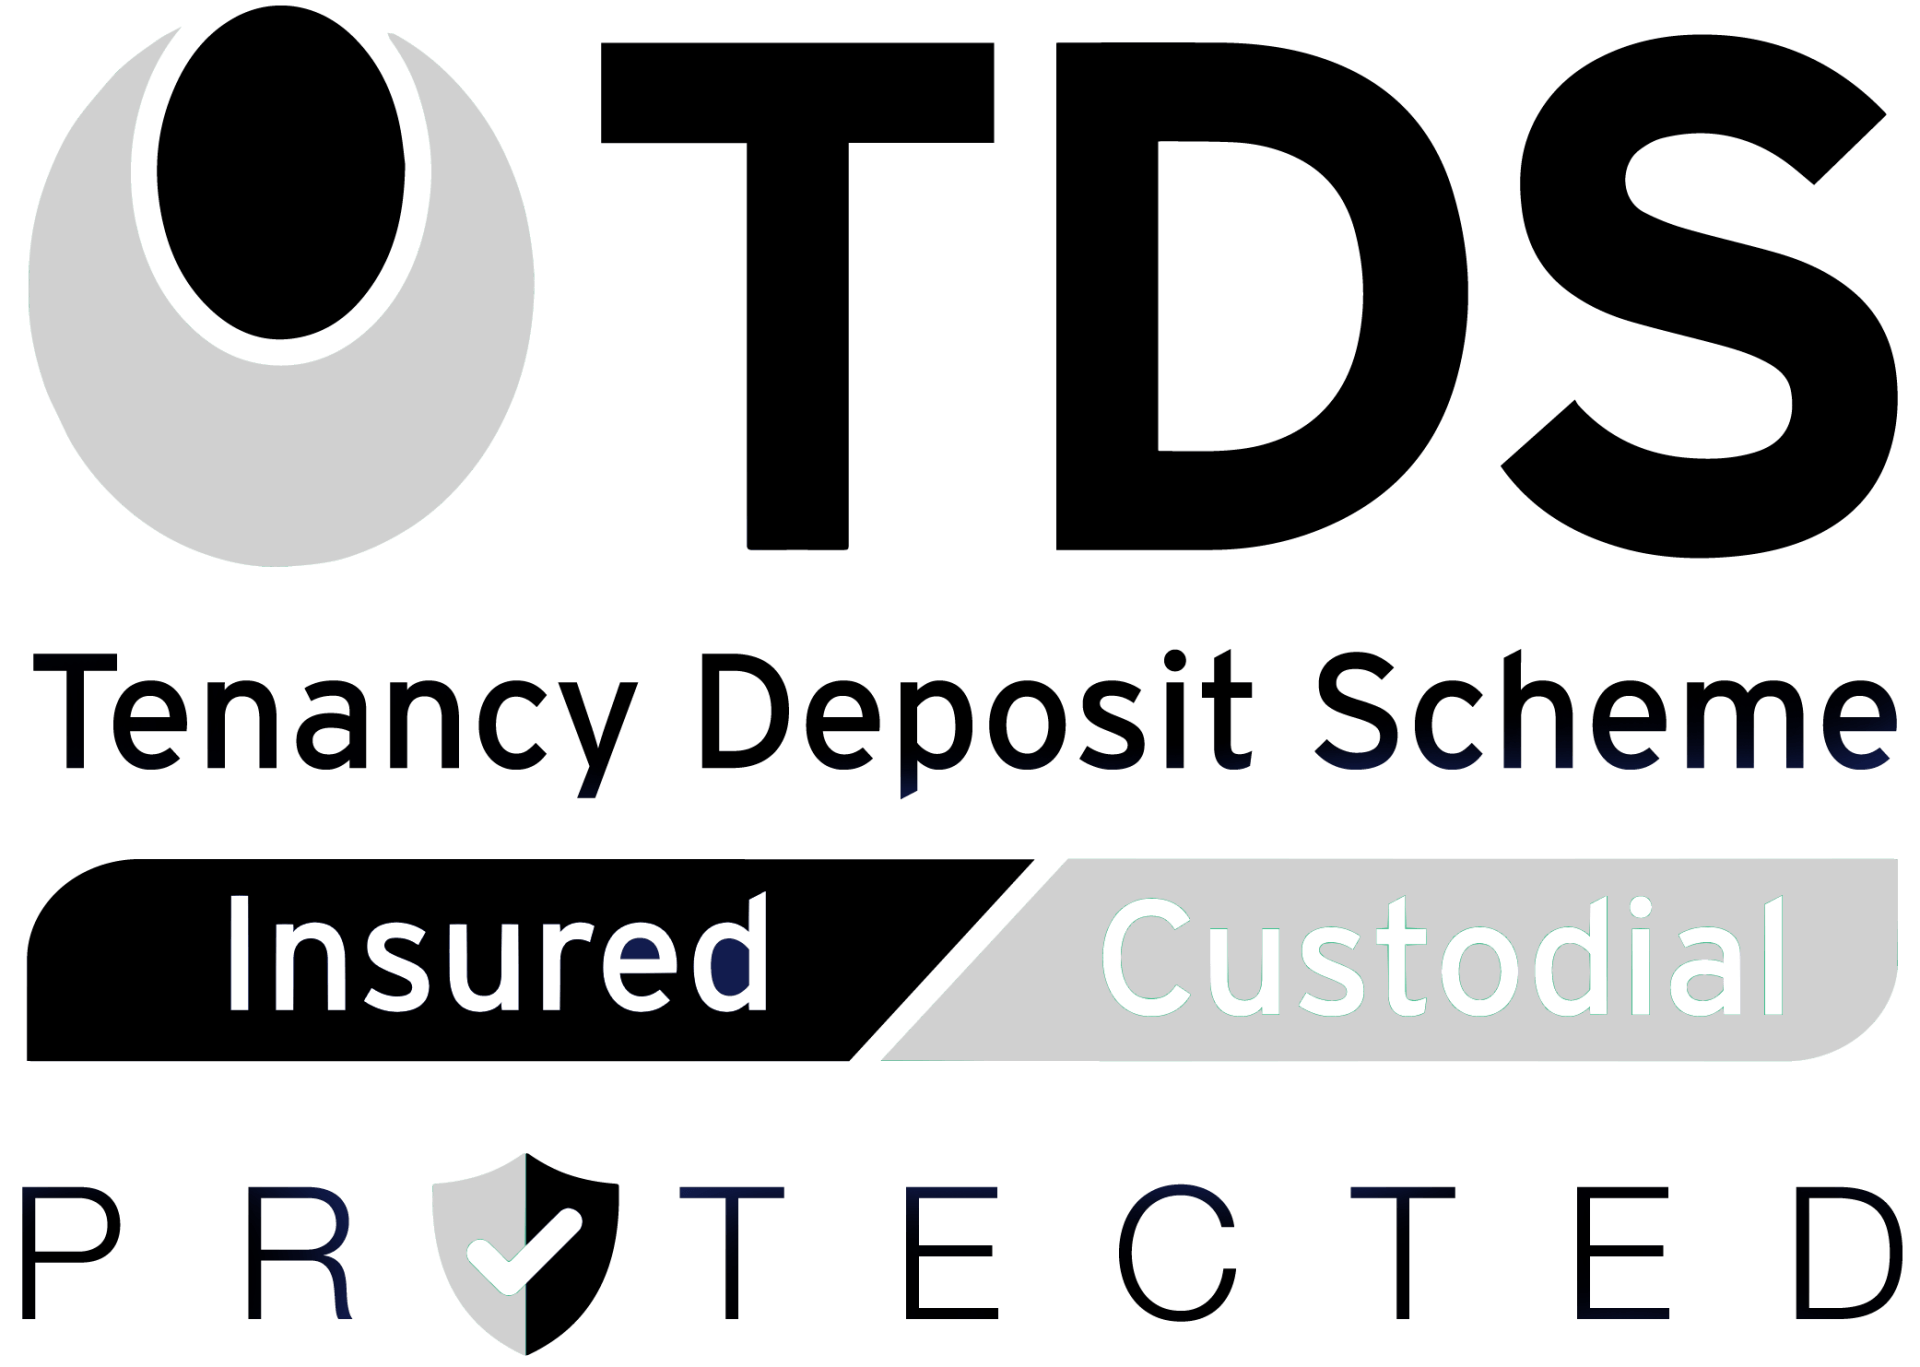 the logo for the tenancy deposit scheme is insured and custodial .